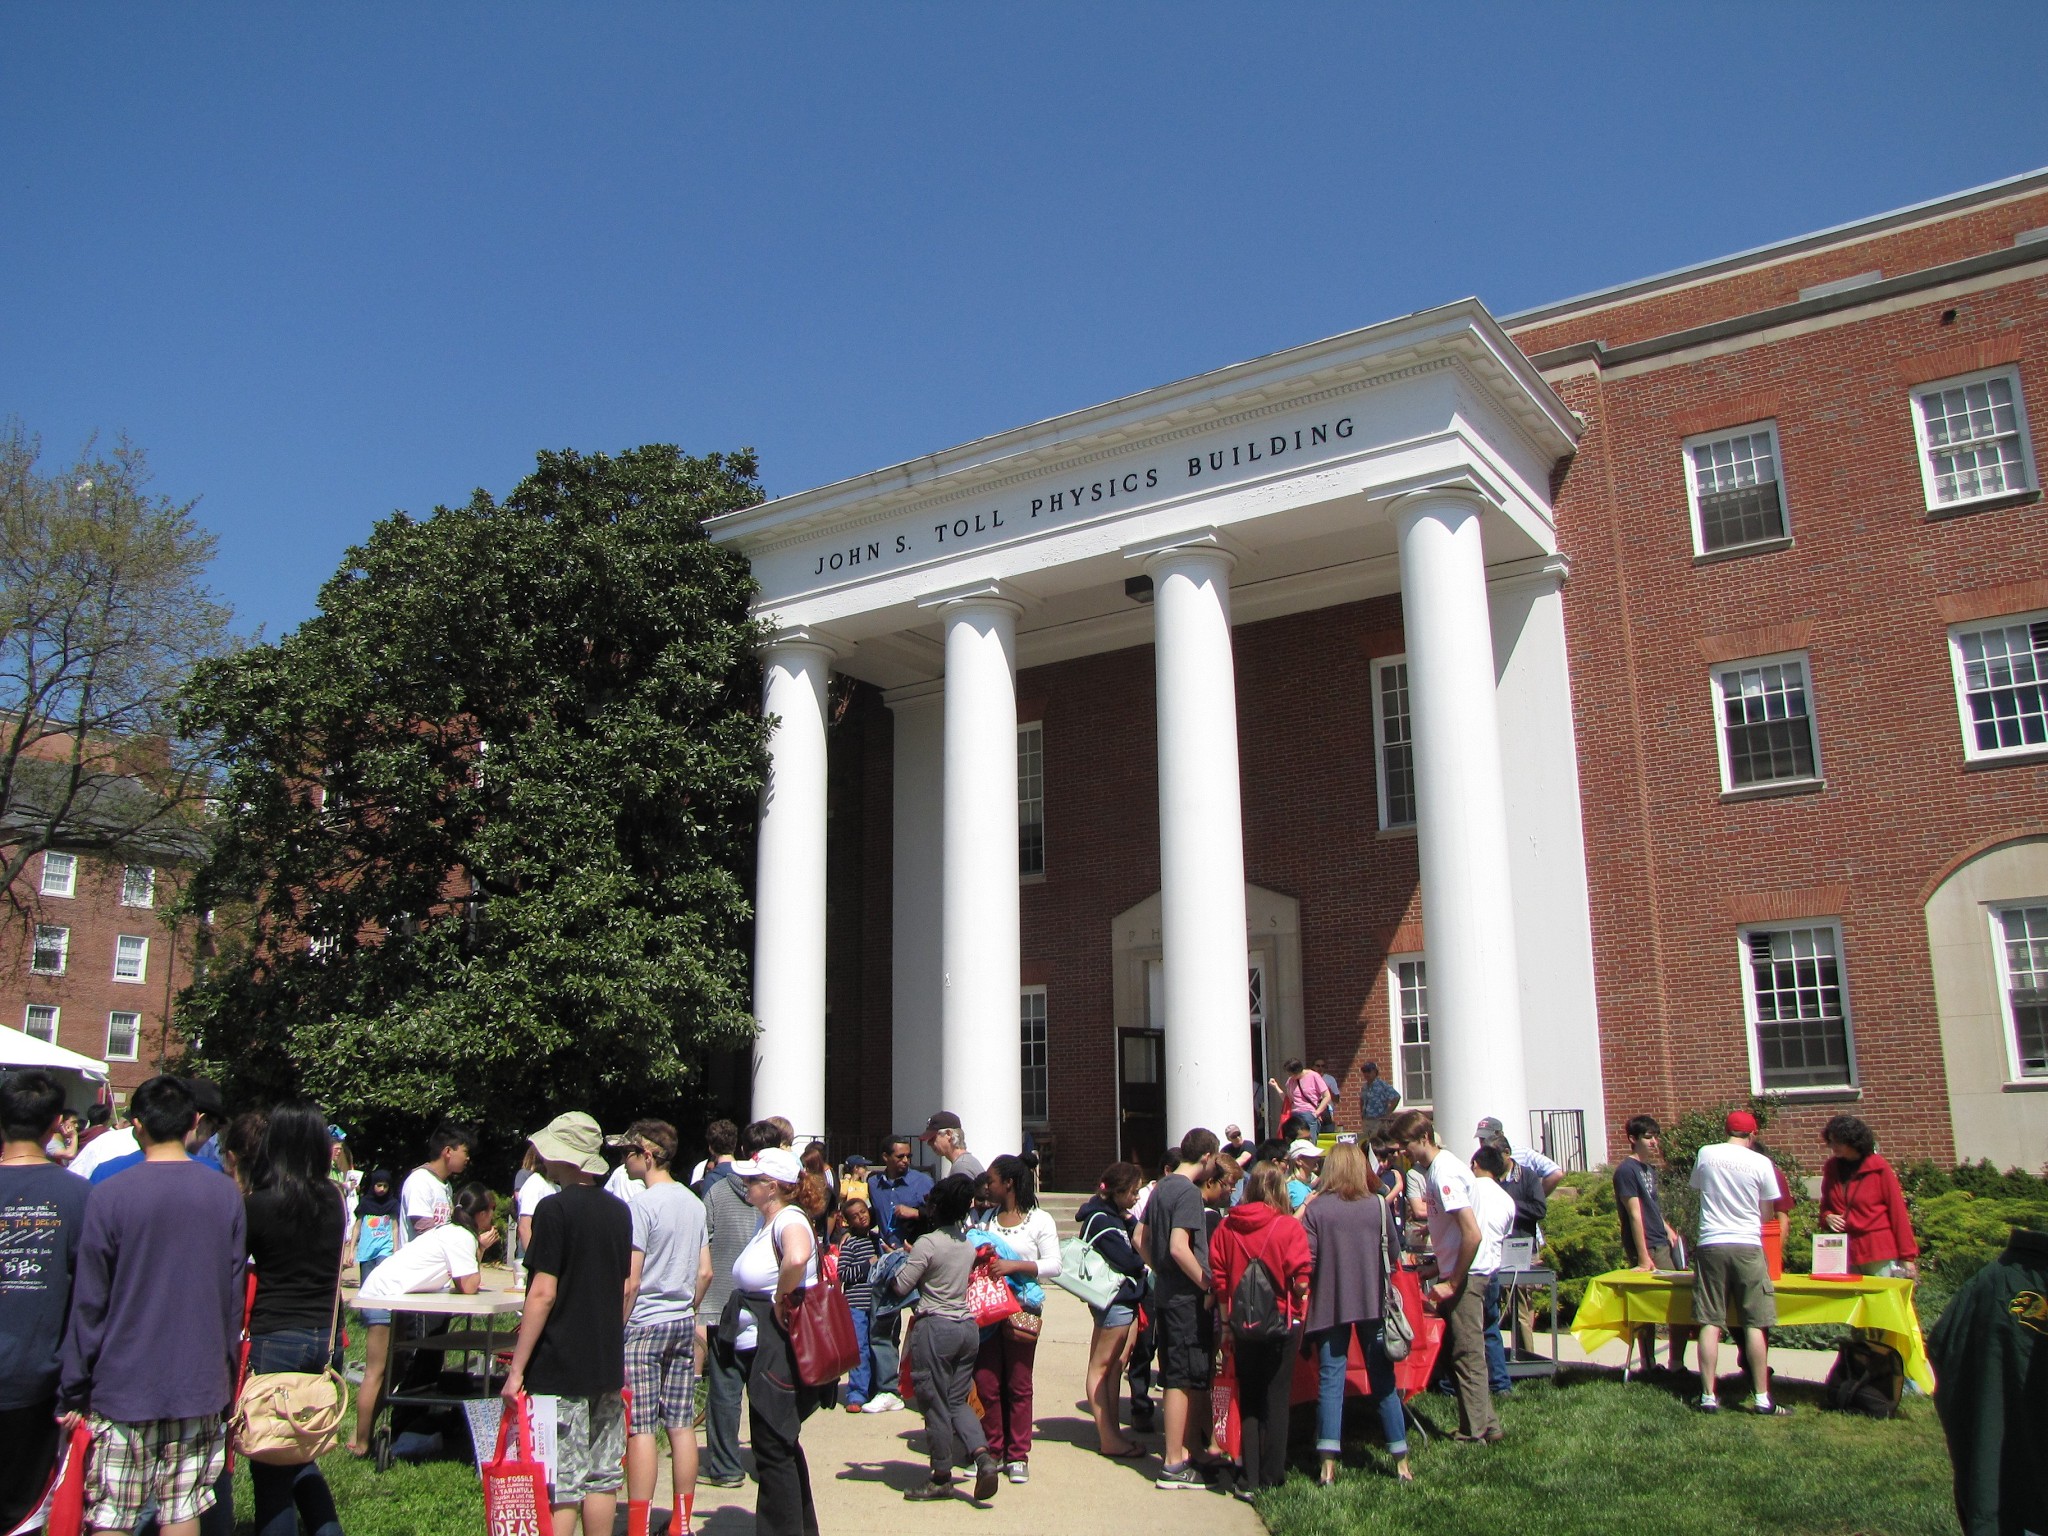 Crowd in front of the Toll Physics Building during Maryland Day 2013